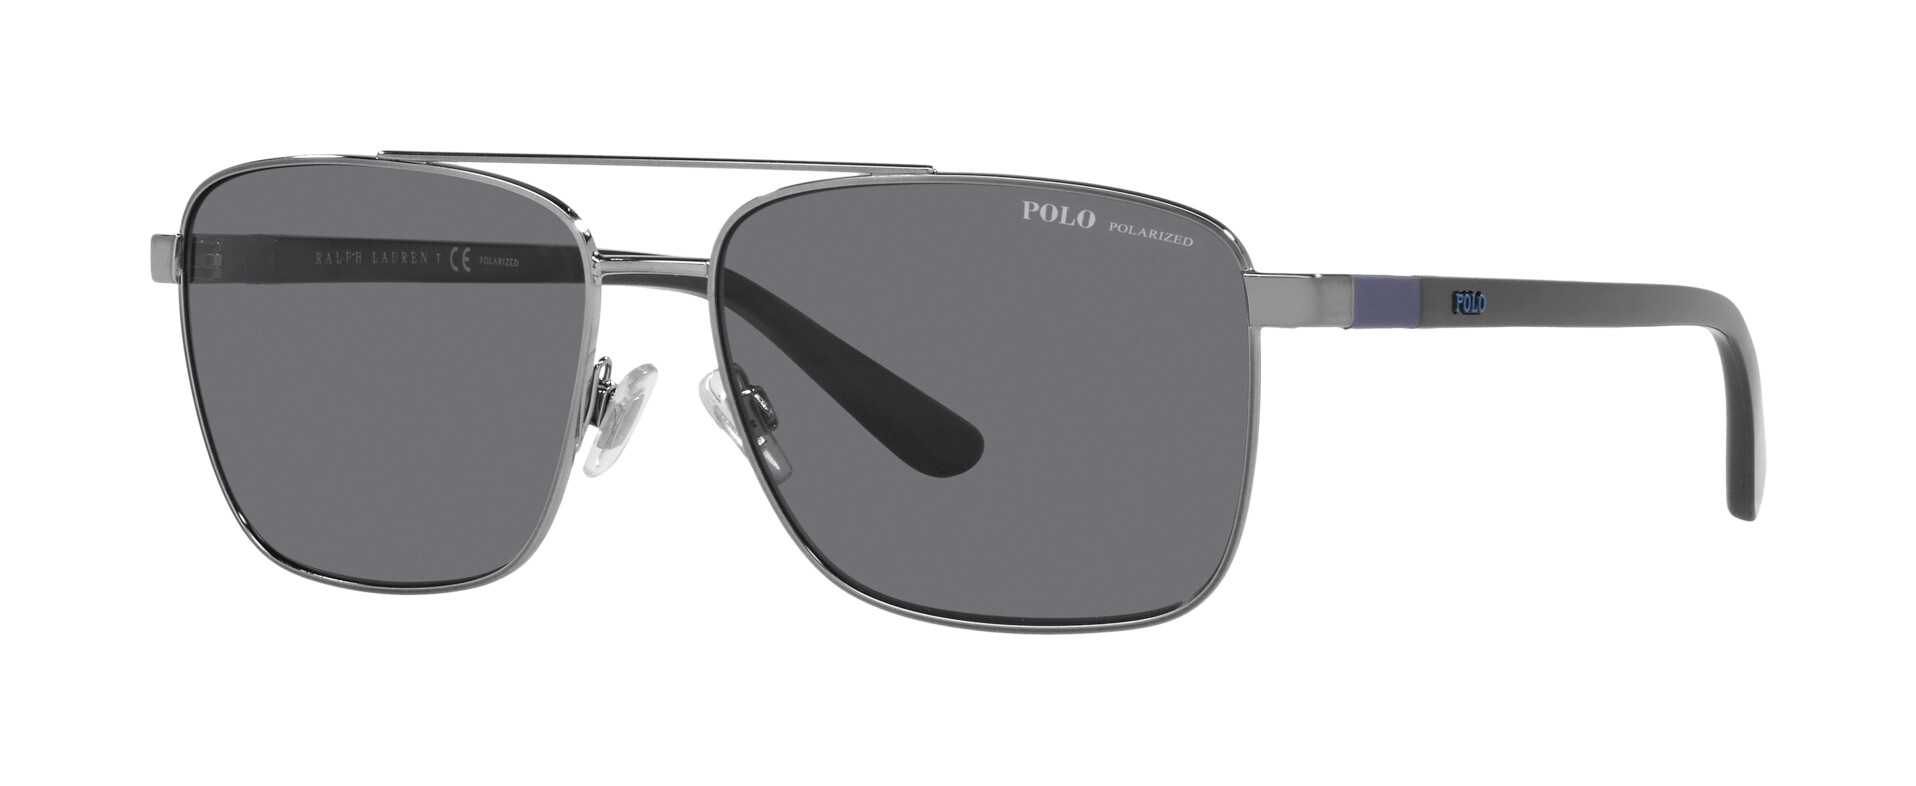 [products.image.angle_left01] Polo Ralph Lauren 0PH3137 900281 Sonnenbrille